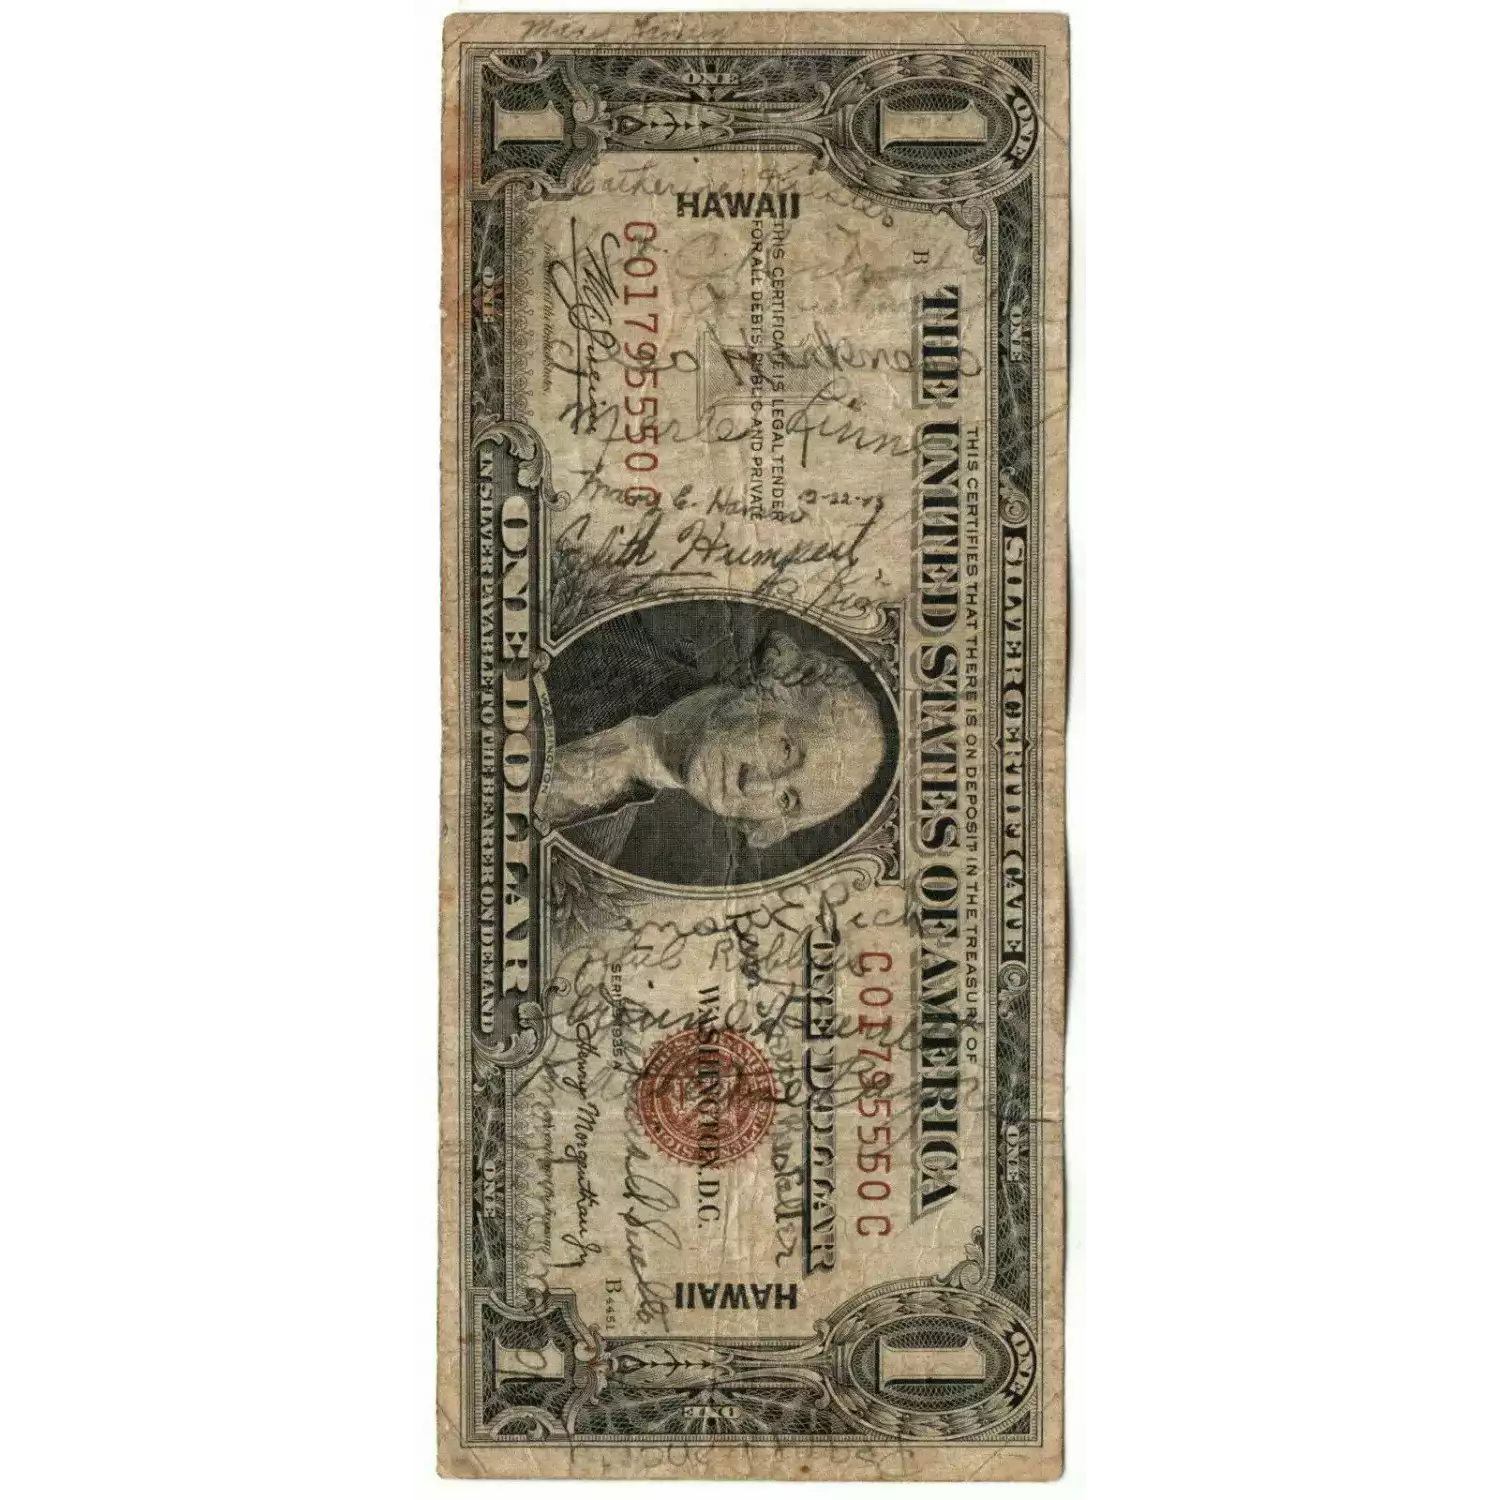 $1 1935-A blue seal. Small Silver Certificates 1608